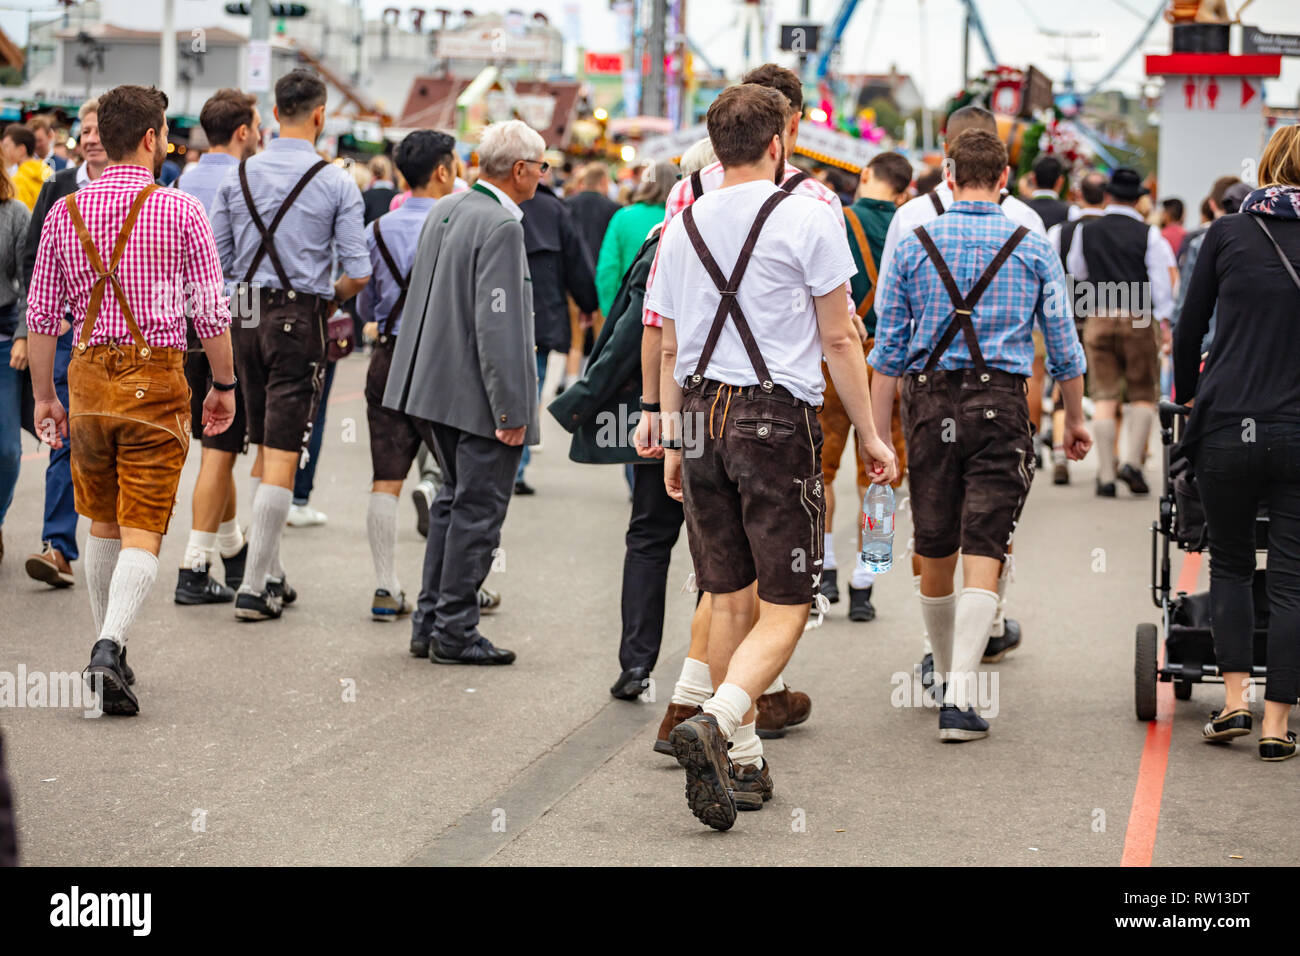 October 7, 2018. Munich, Germany, Oktoberfest, Group of young men in traditional costumes walking among the crowd, back view Stock Photo